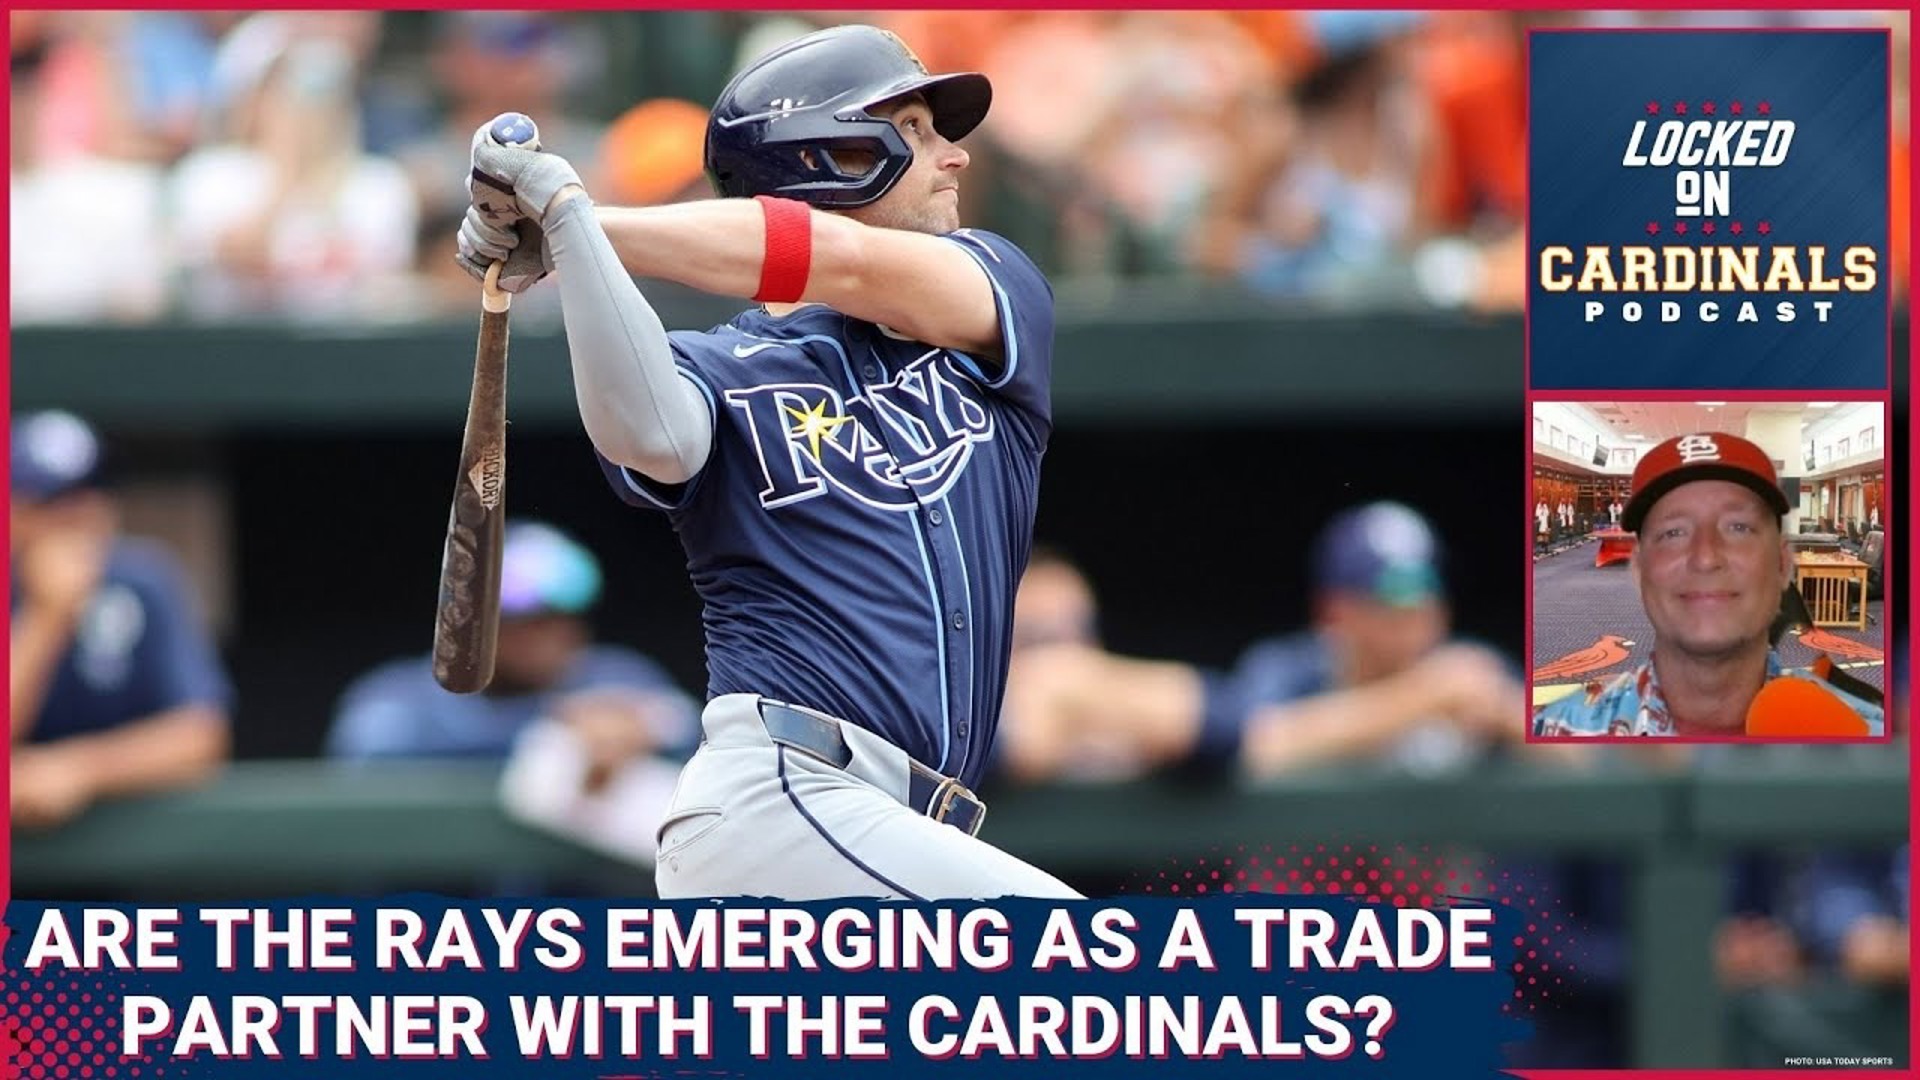 - Andre Pallante
- Tampa Bay Rays Trade Idea
- Minor League Players Of The Month
- Tommy Edman
- Lars Nootbaar